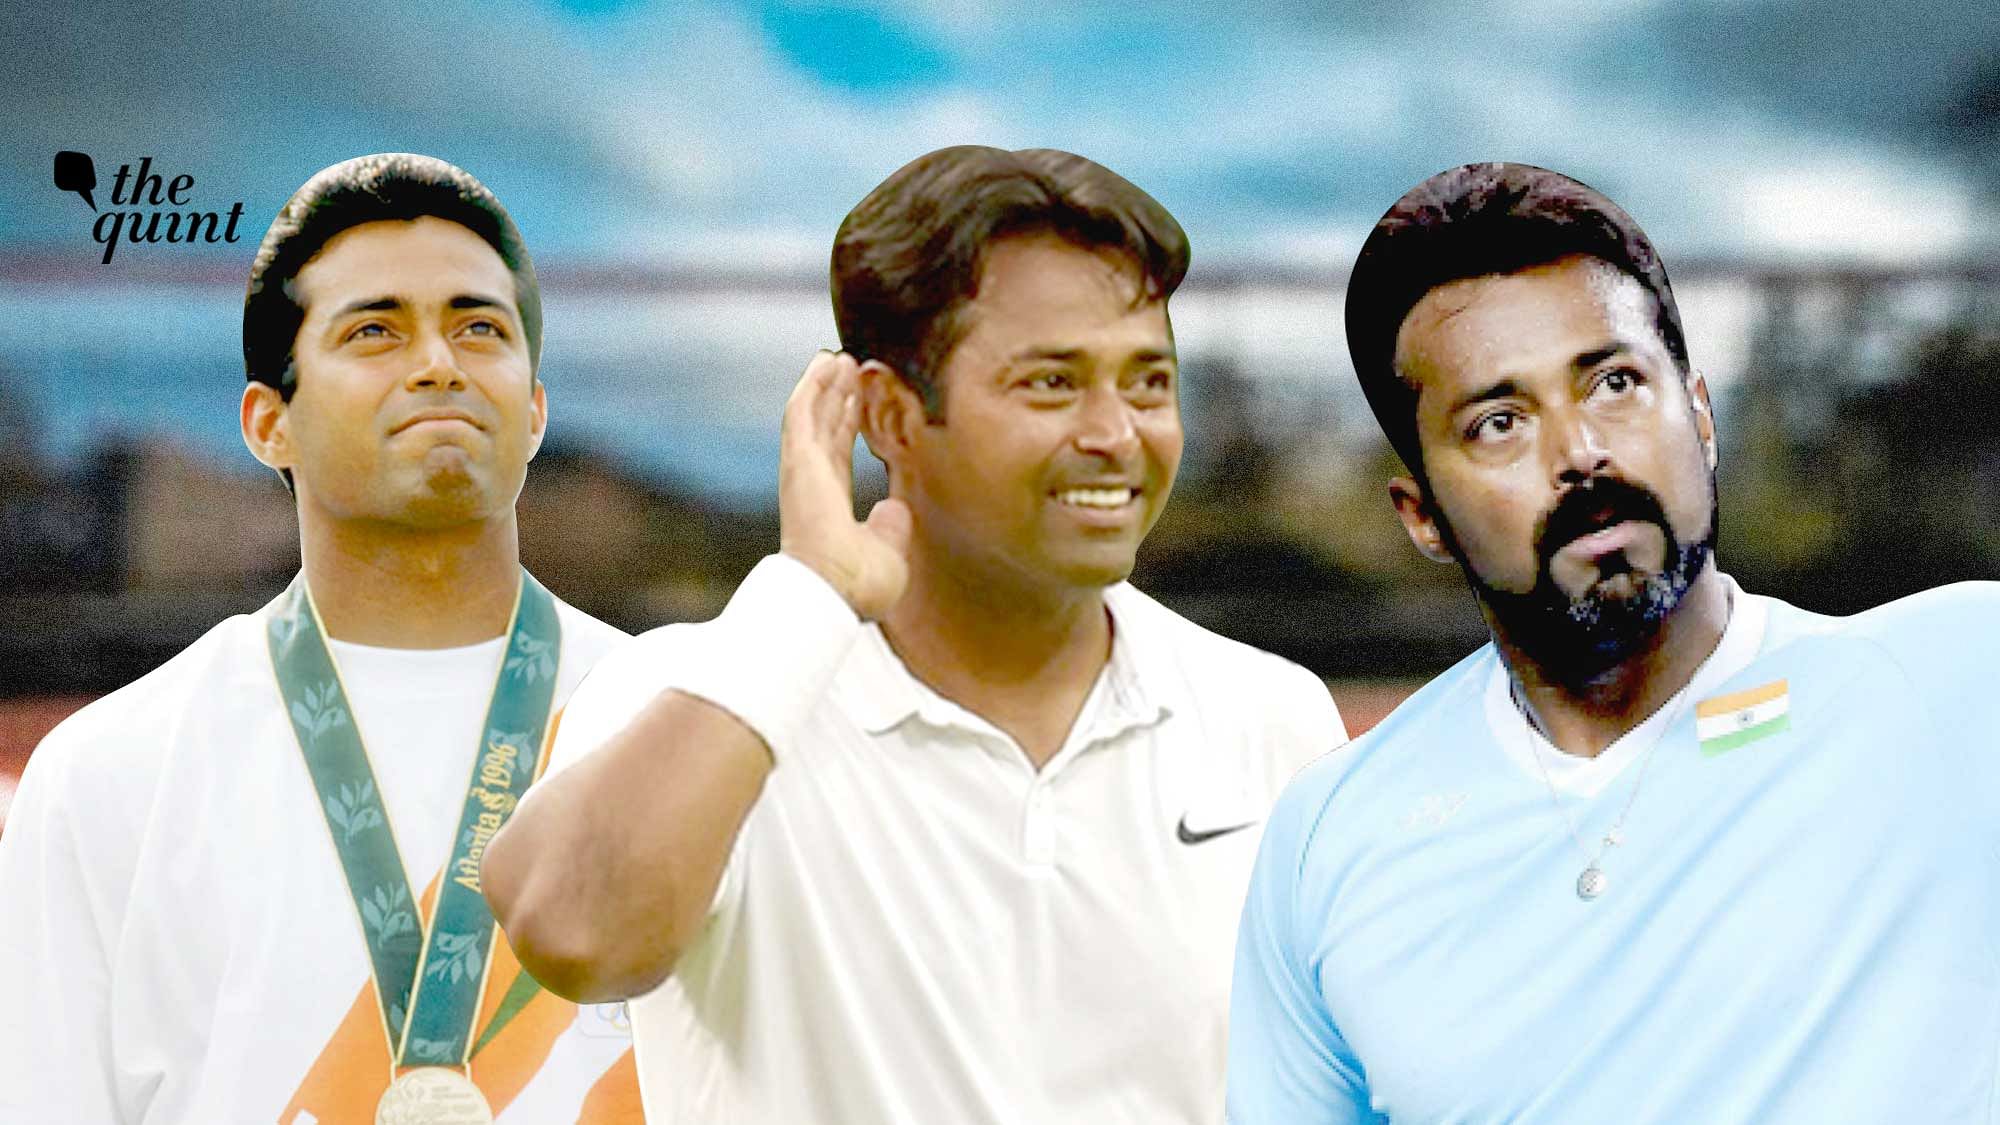 After a career spanning nearly three decades, Leander Paes recently announced that he will retire from the pro circuit after the upcoming 2020 season.